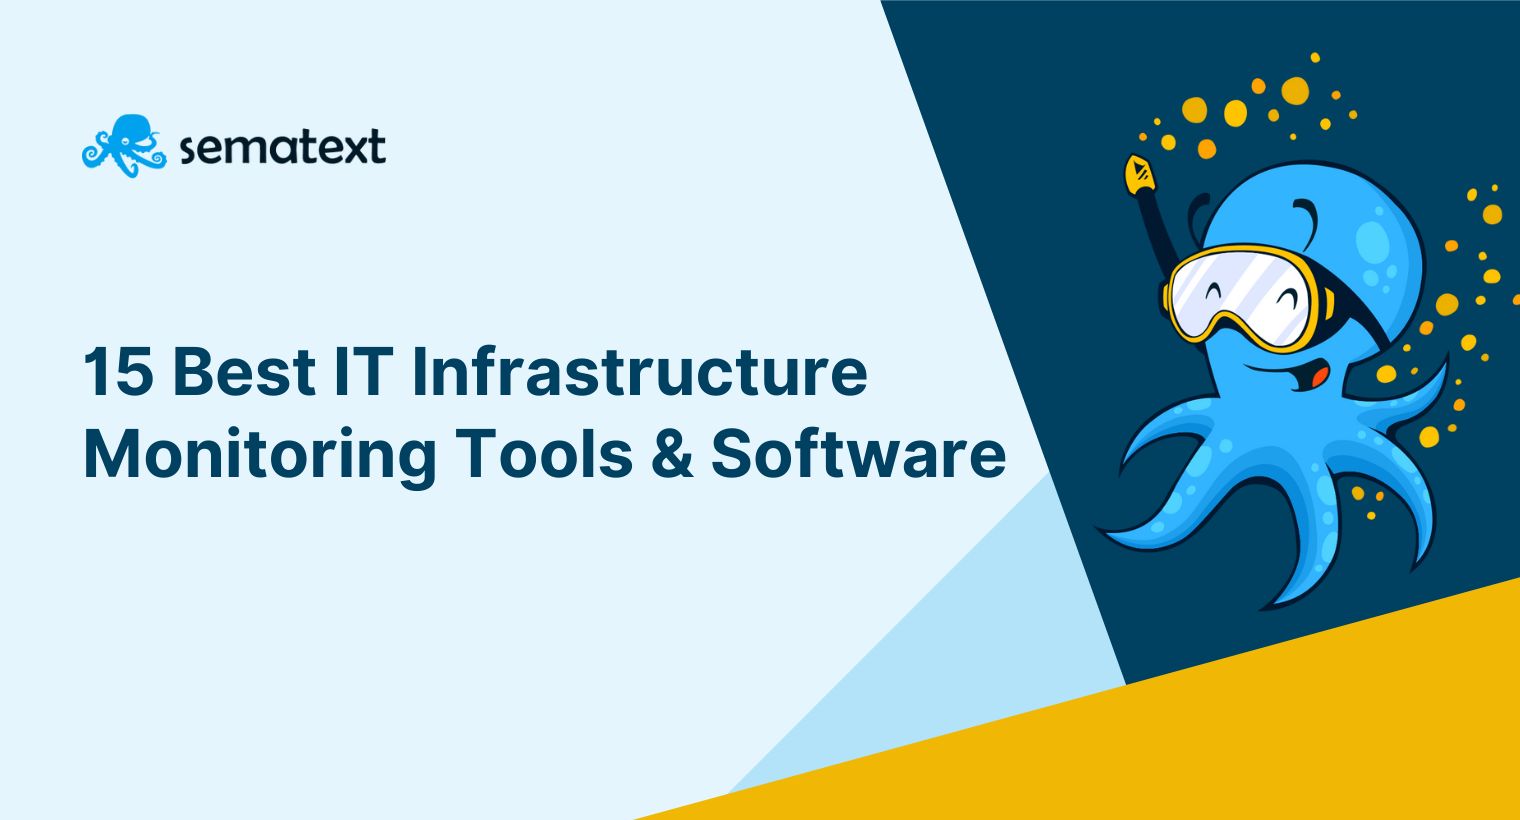 15 Best IT Infrastructure Monitoring Tools & Software [2022 Comparison]